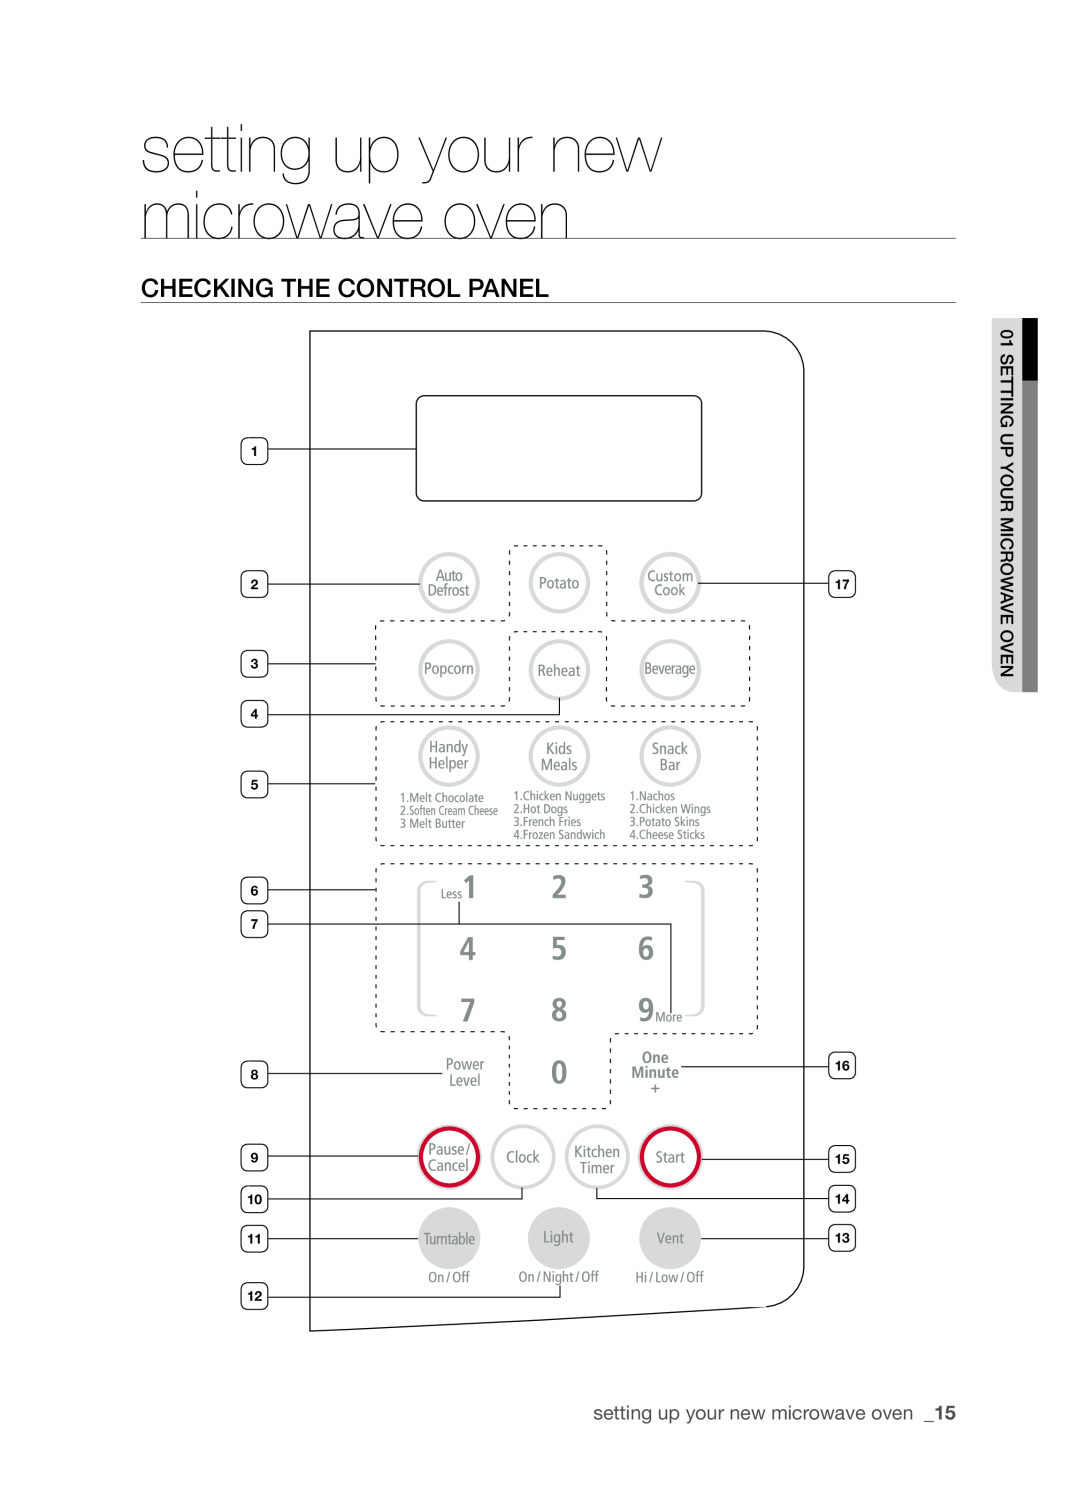 Samsung SMH8165STE user manual Checking the control panel, setting up your new microwave oven 